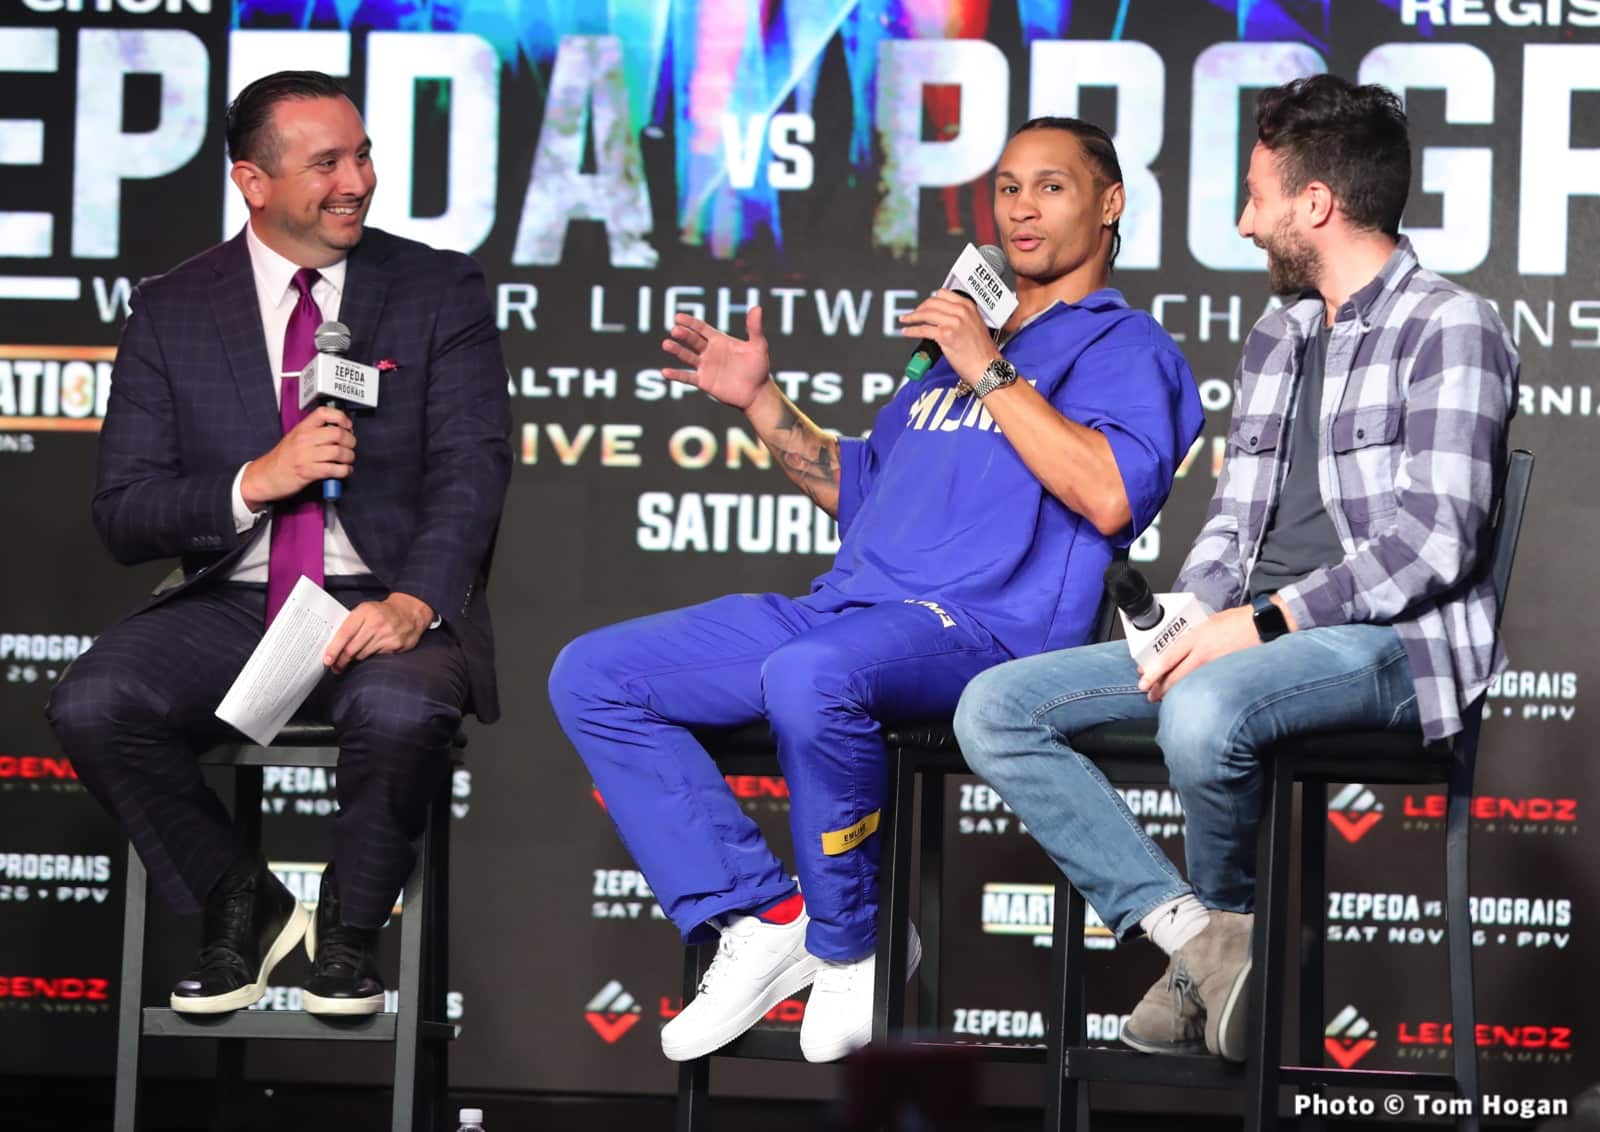 Prograis vs. Zepeda Ordered To Fight For Vacant WBC 140 Pound Belt